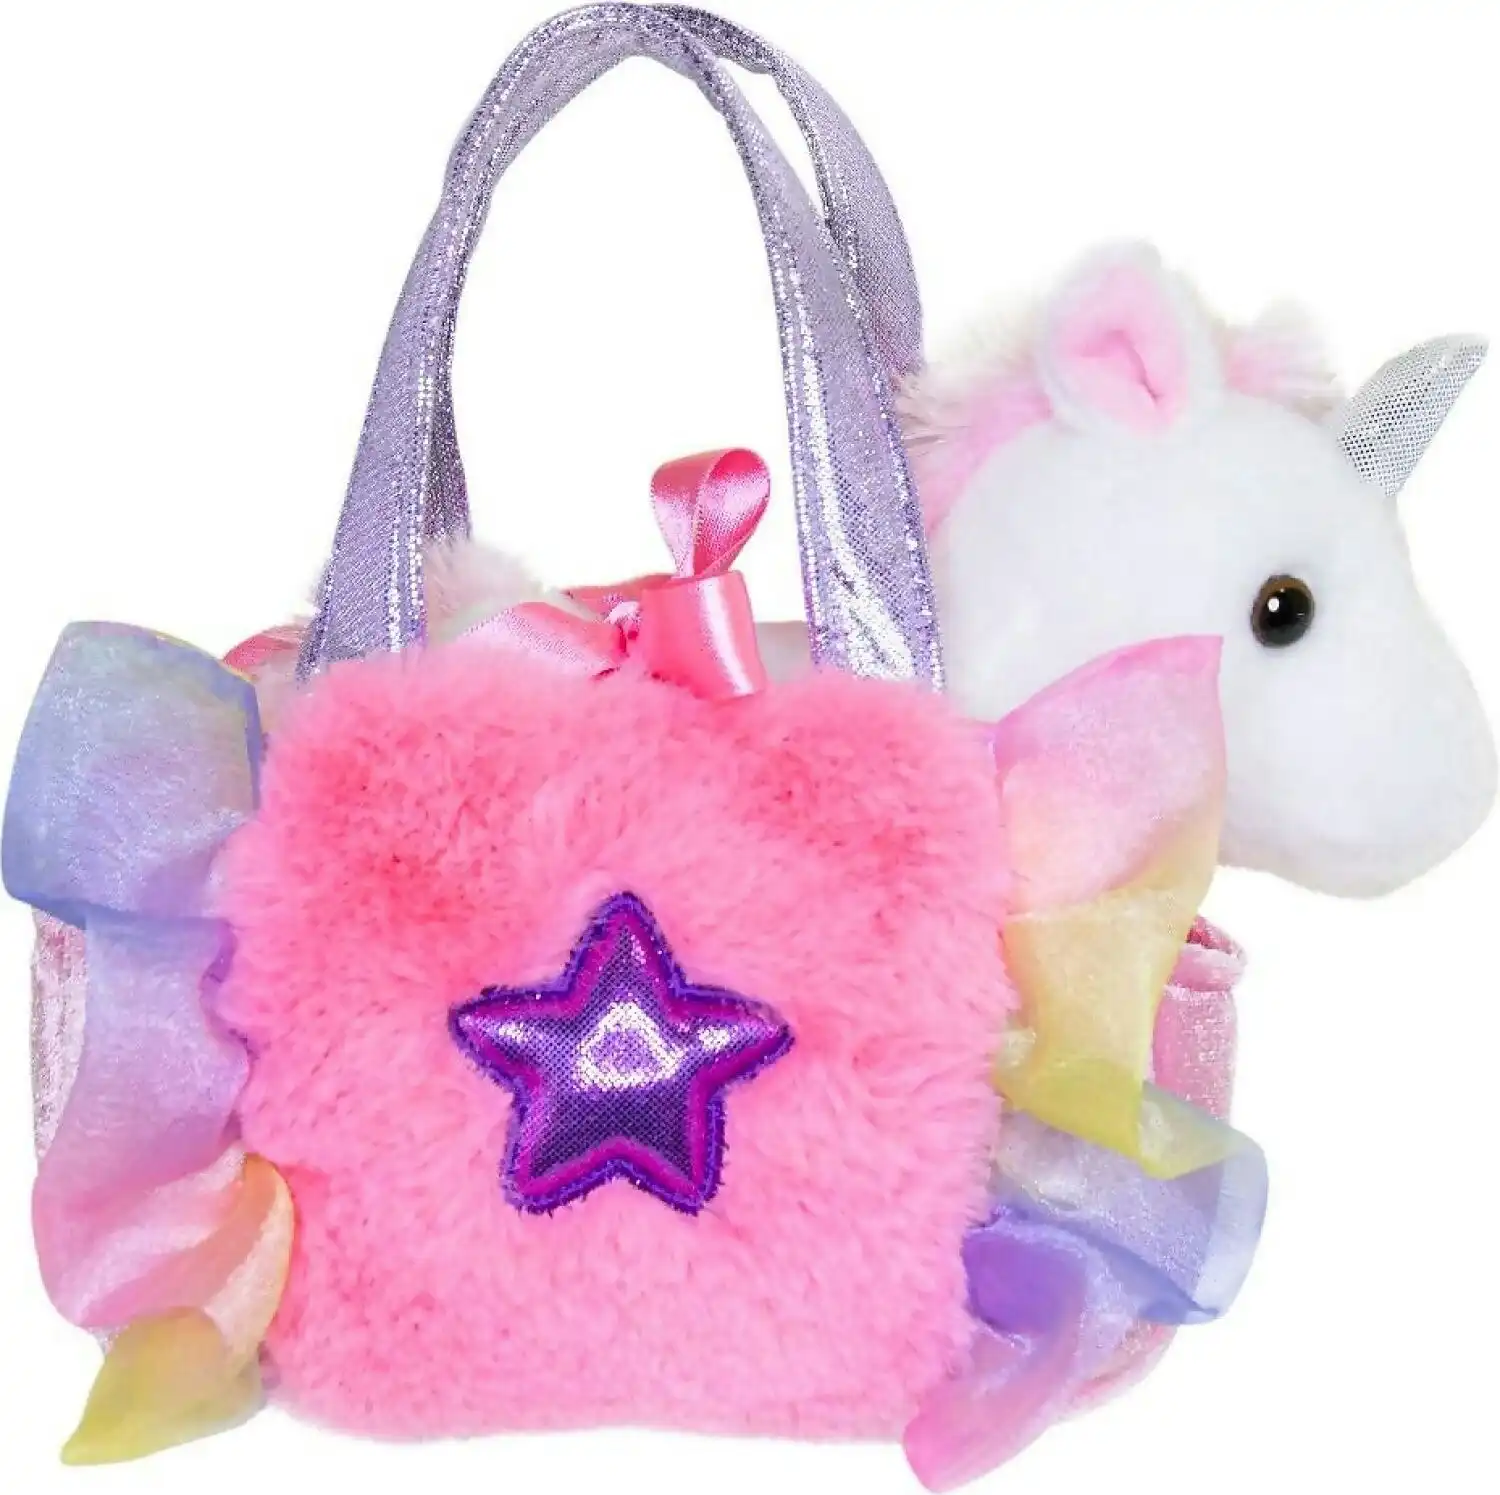 Cotton Candy - Fancy Pals Unicorn In Pink Frill Bag With Star